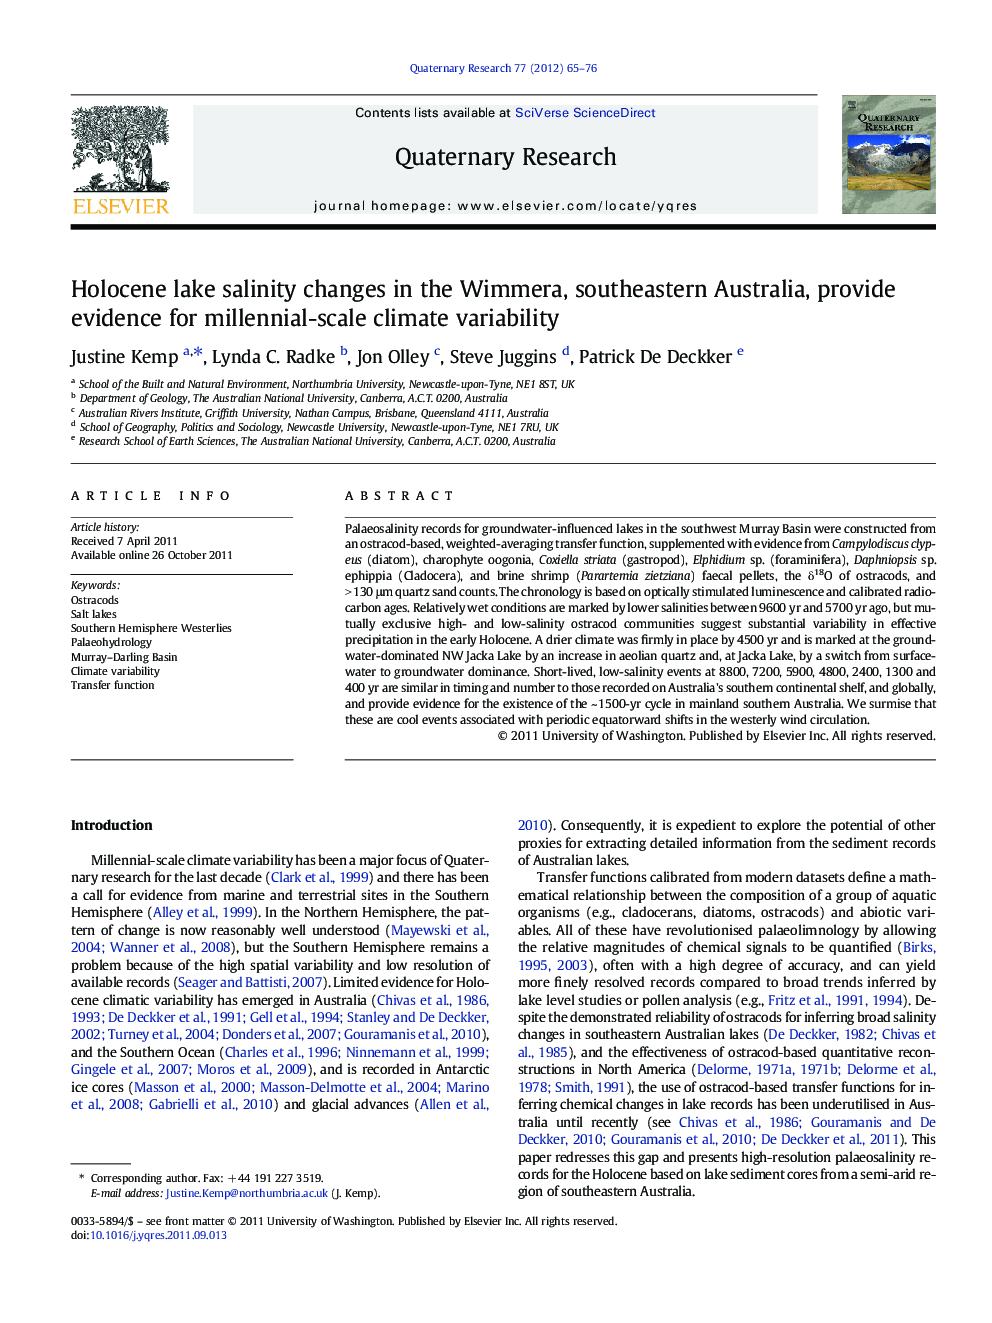 Holocene lake salinity changes in the Wimmera, southeastern Australia, provide evidence for millennial-scale climate variability